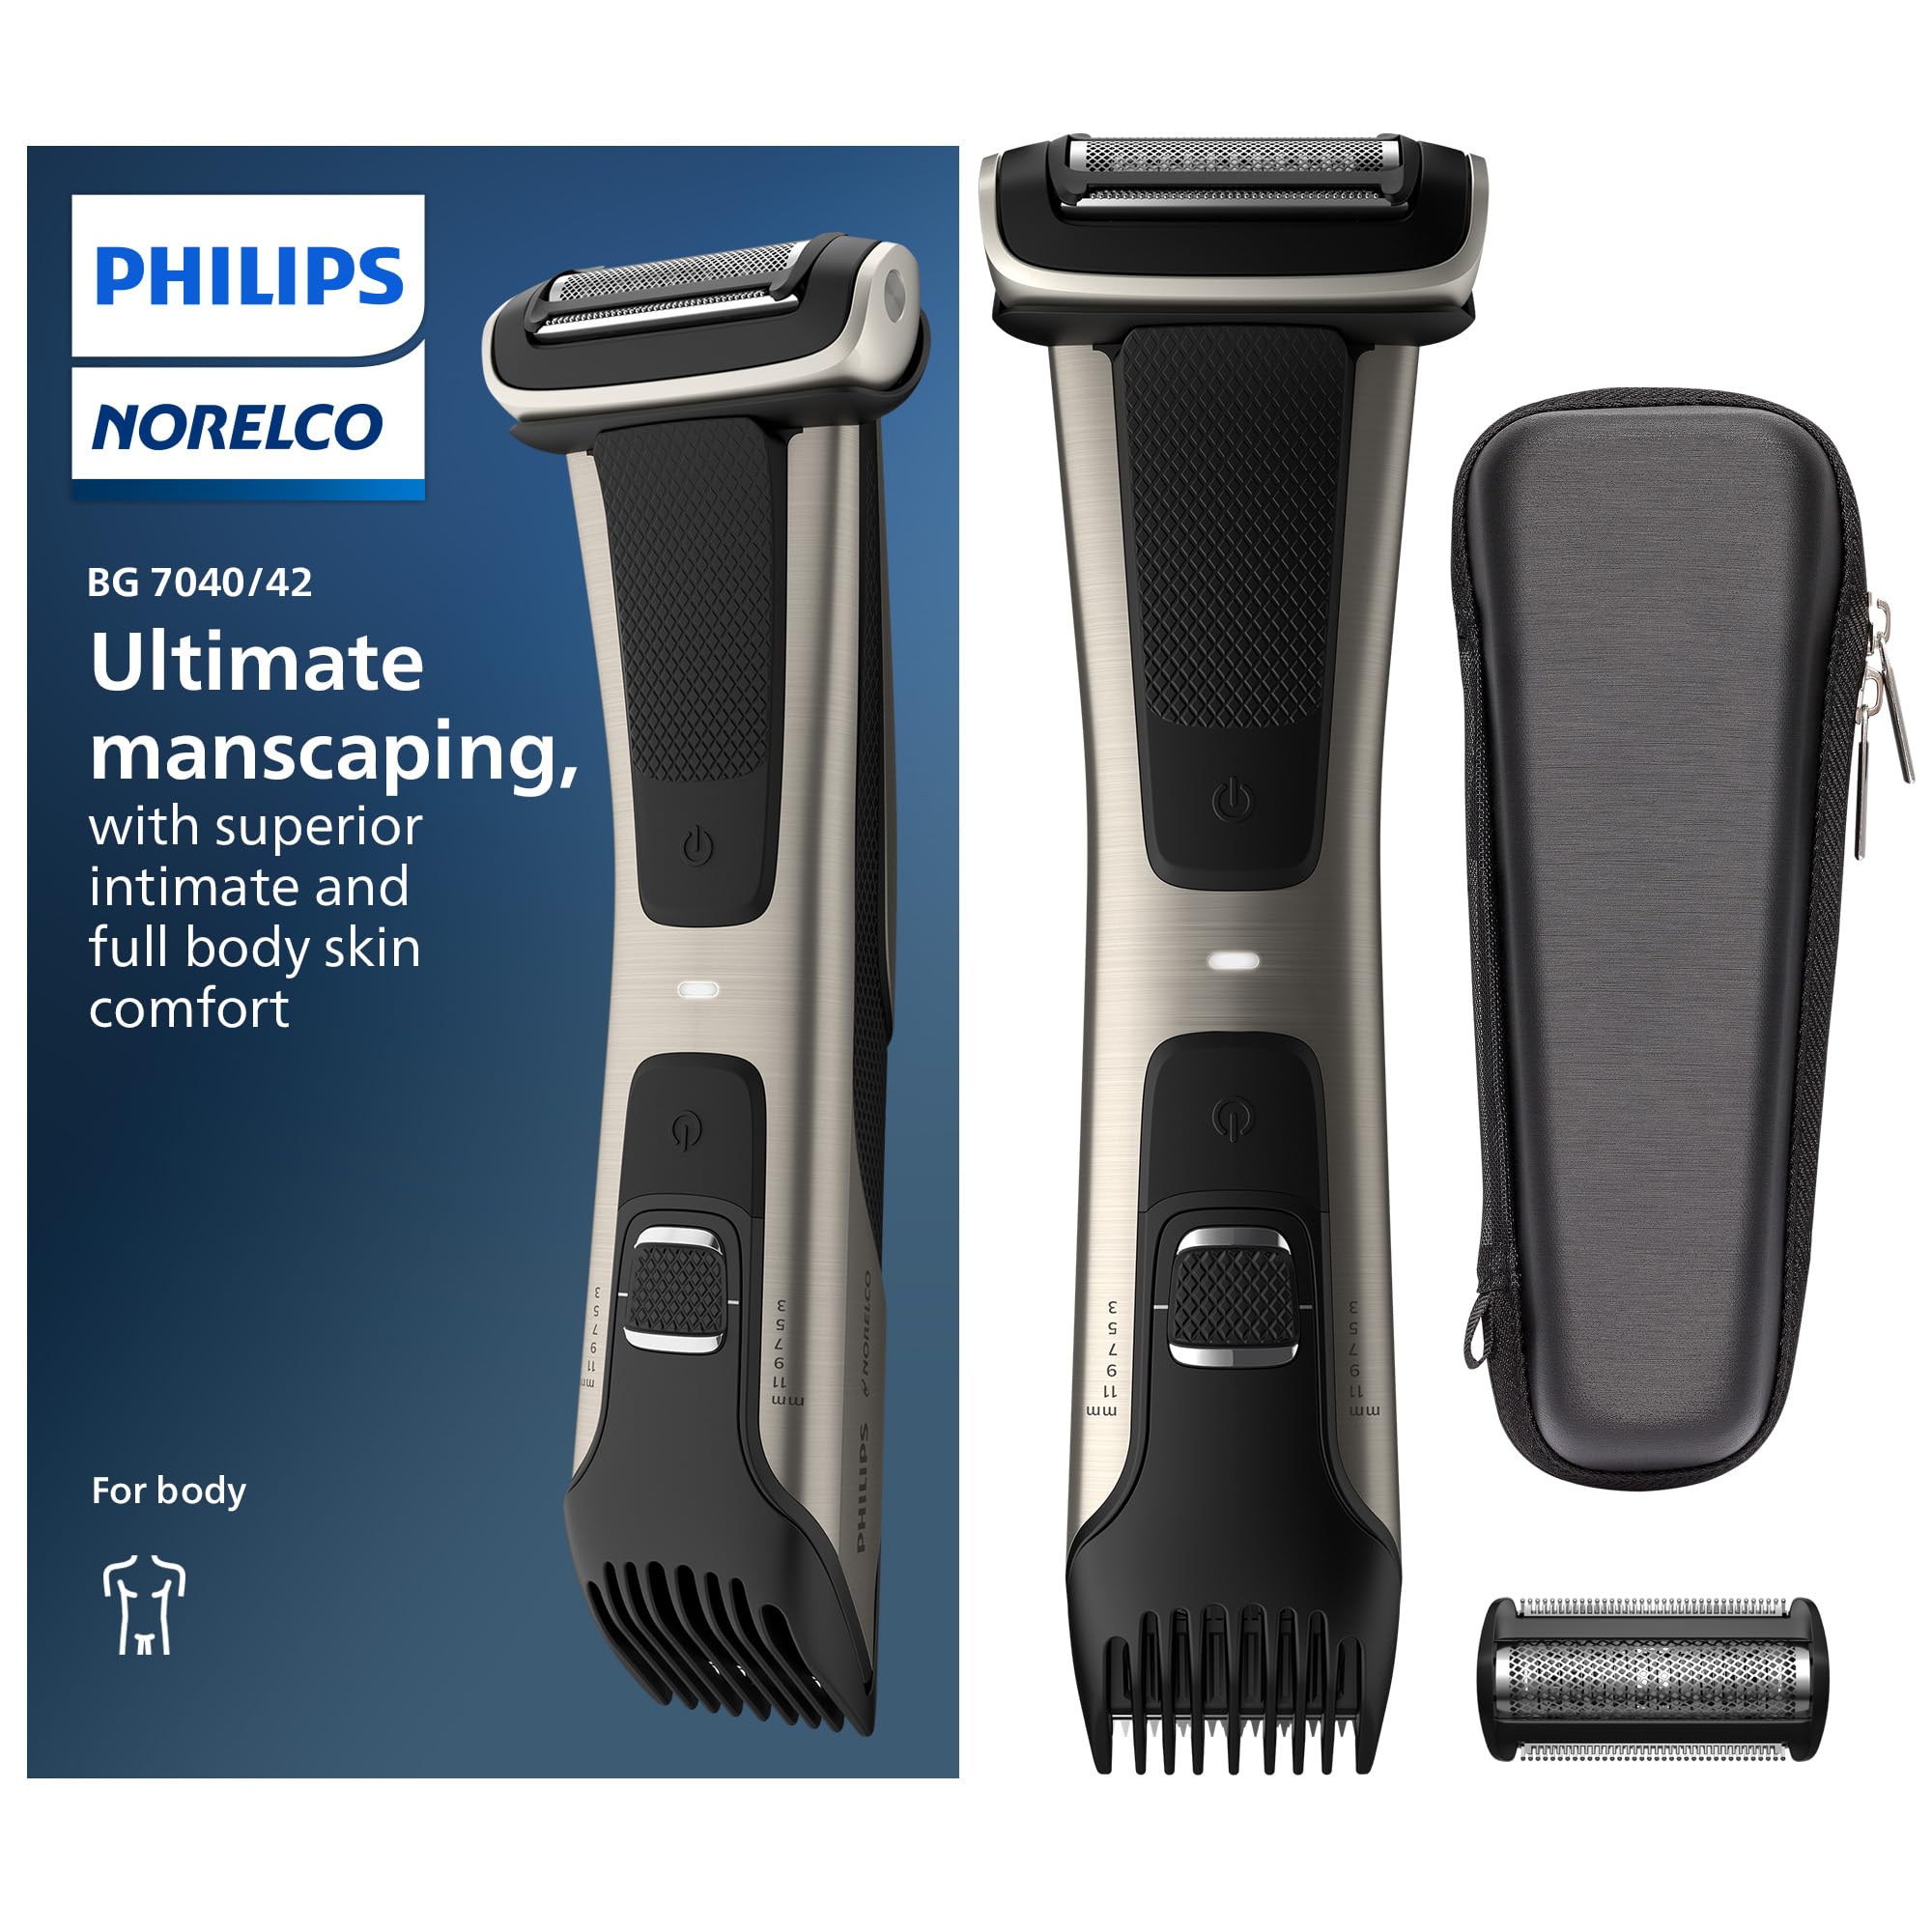 Philips Norelco Exclusive Bodygroom Series 7000 Showerproof Body & Manscaping Trimmer & Shaver with case and Replacement Head fo